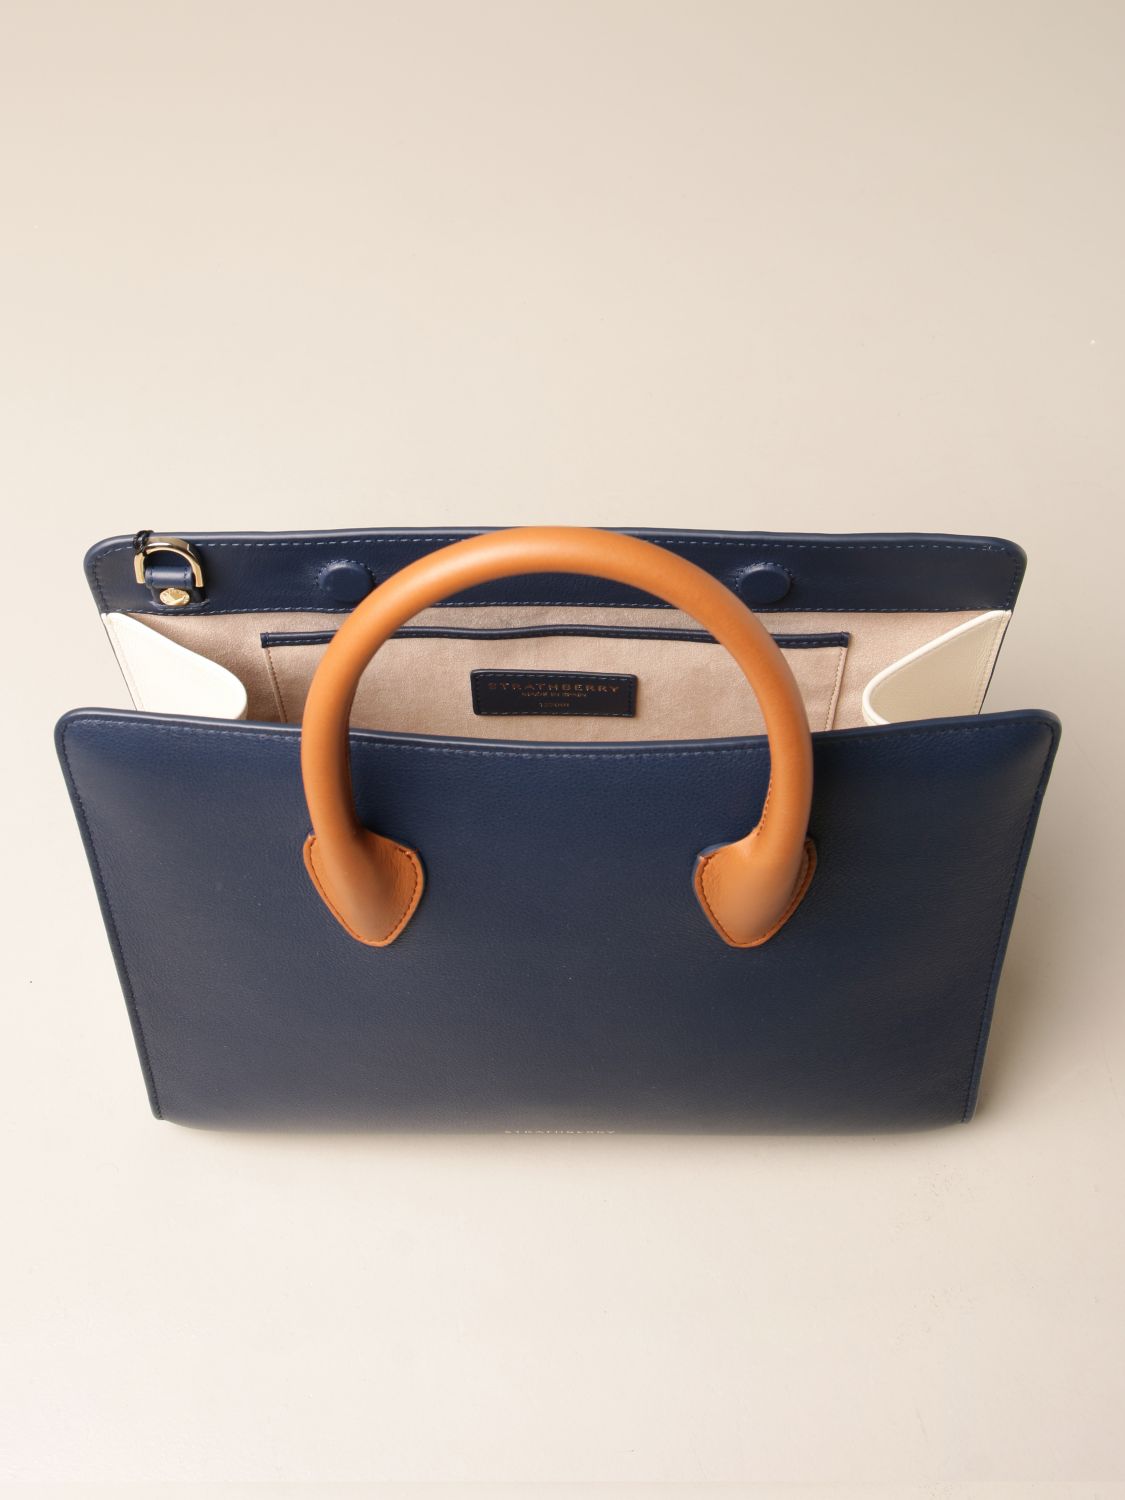 STRATHBERRY Tricolor Leather Midi Tote Bag